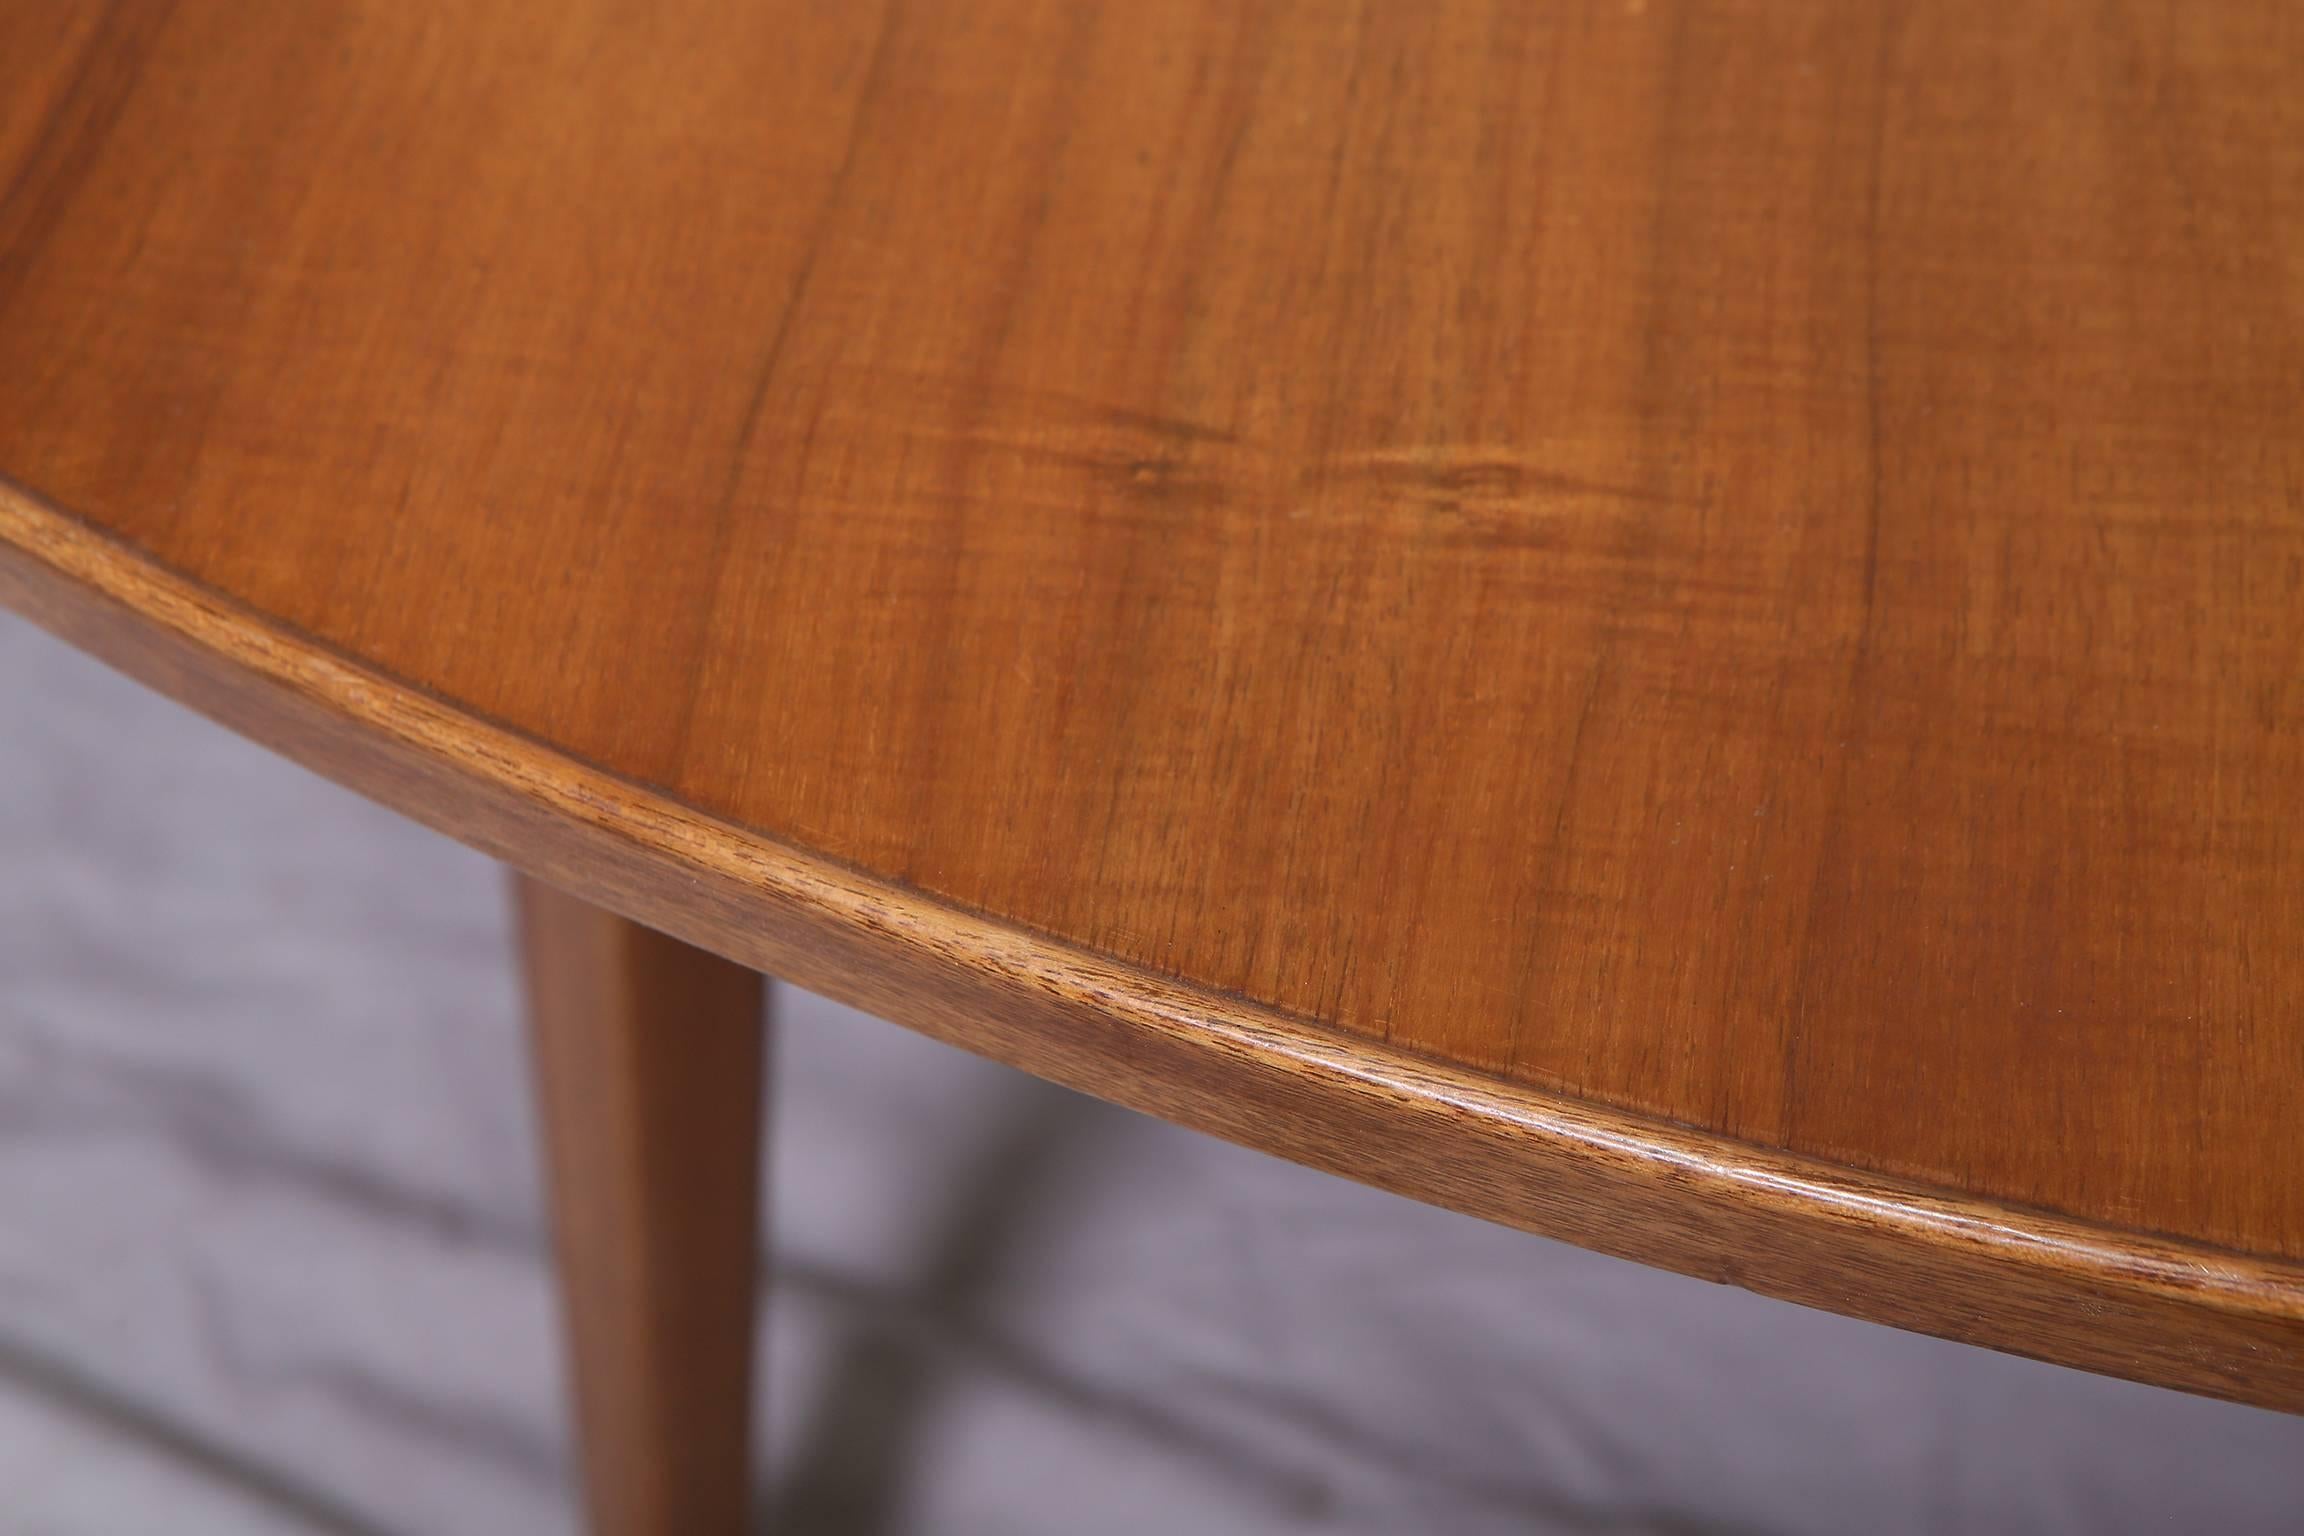 Mid-20th Century Bleached Mahogany Dining Table by Edward Wormley for Dunbar